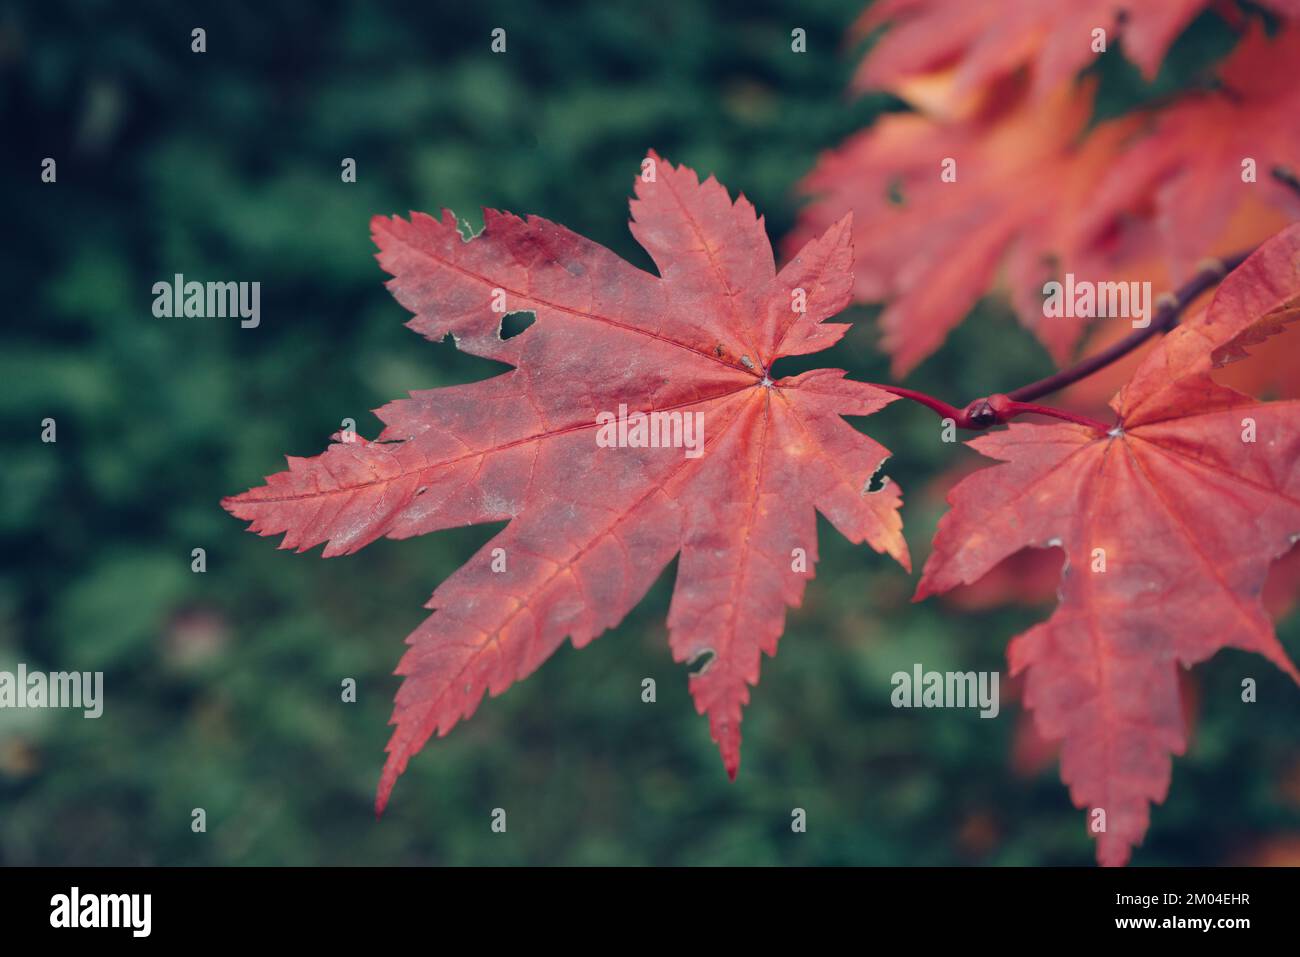 beauty of red leaves of acer japonicum against dark green background at autumn Stock Photo